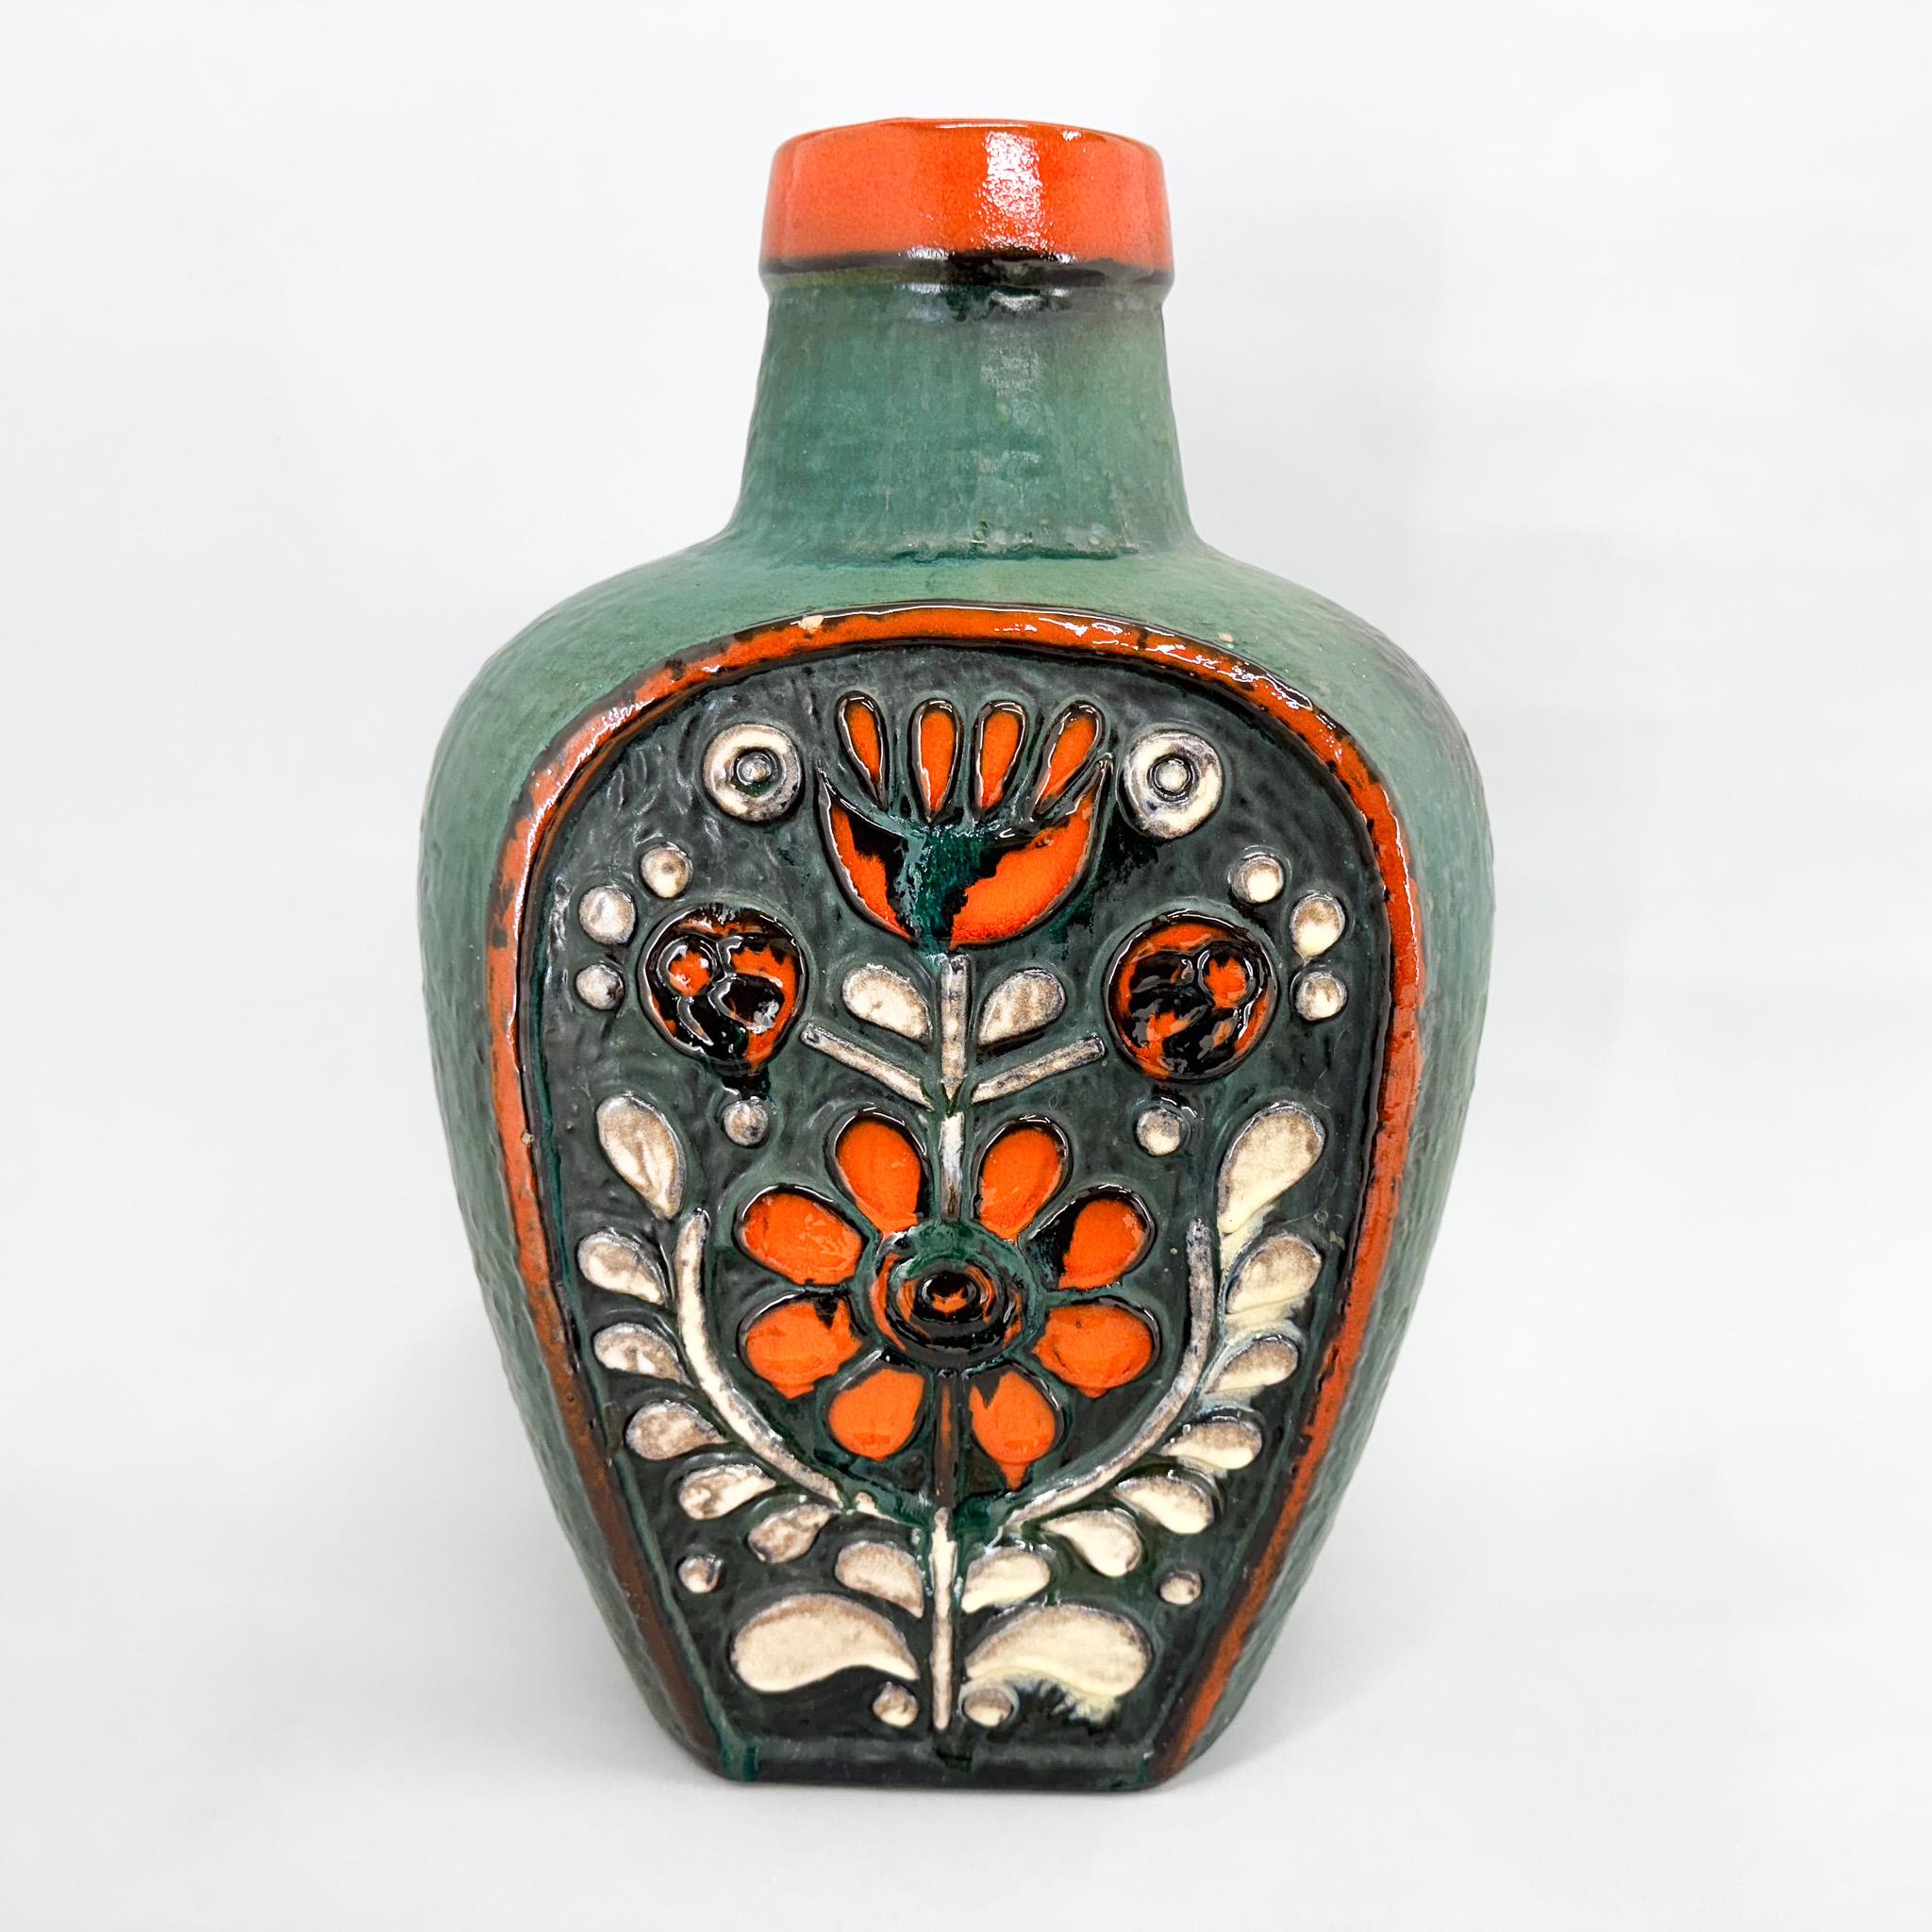 Vintage ceramic floor vase designed in 1972 by Dieter Peter and is part of the Luxus series. Produced by Carstens Tonniesof in Germany.